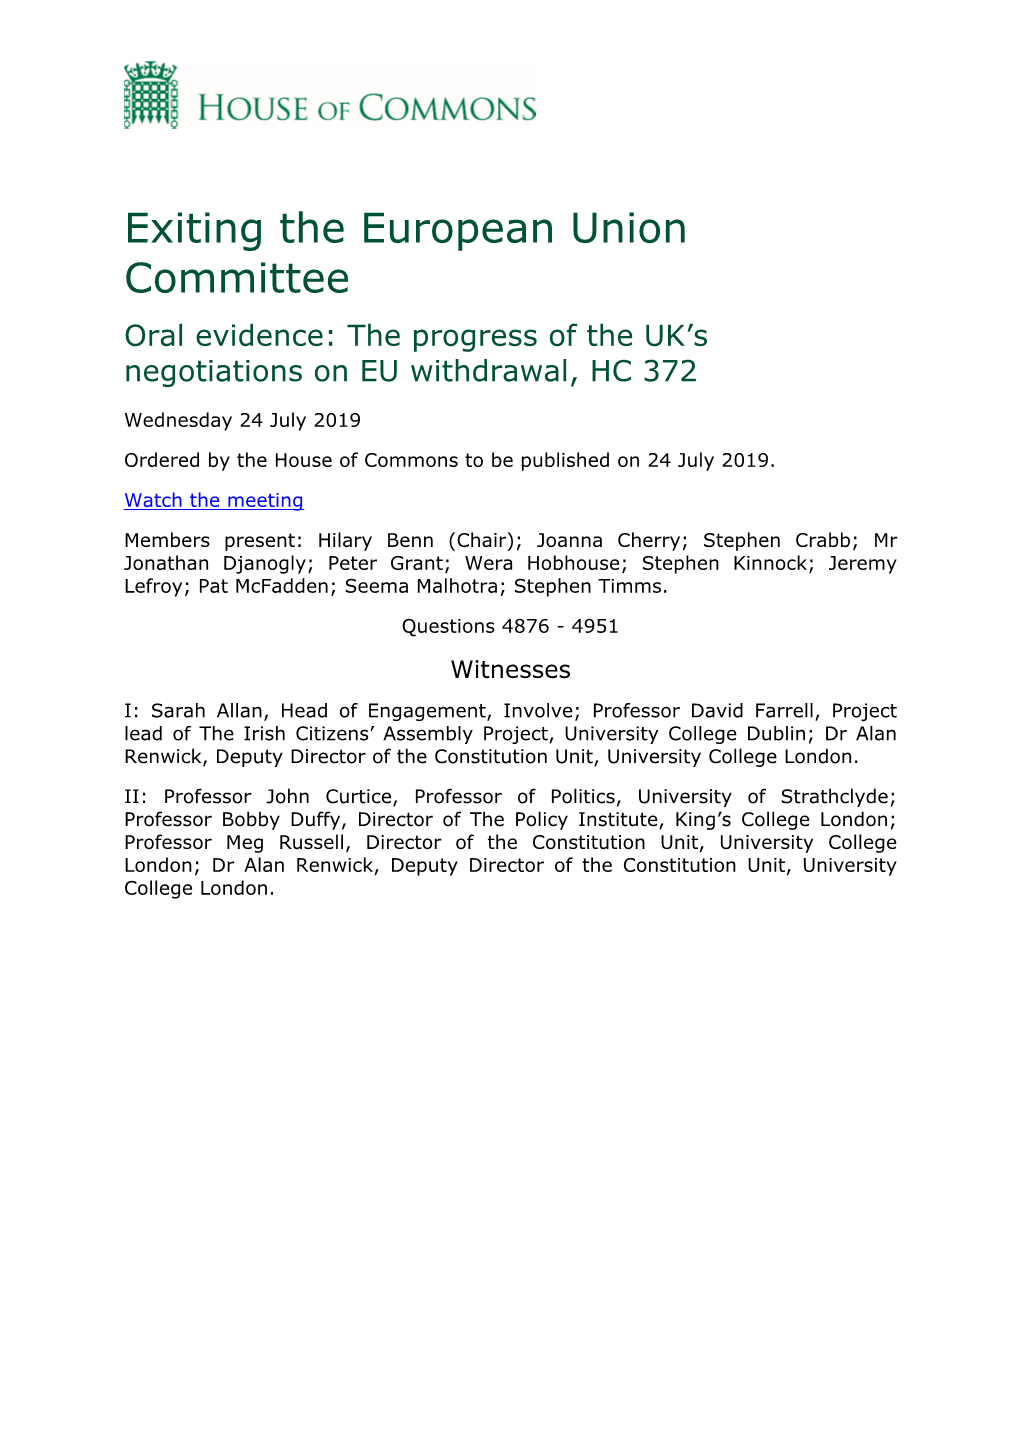 Oral Evidence: the Progress of the UK’S Negotiations on EU Withdrawal, HC 372